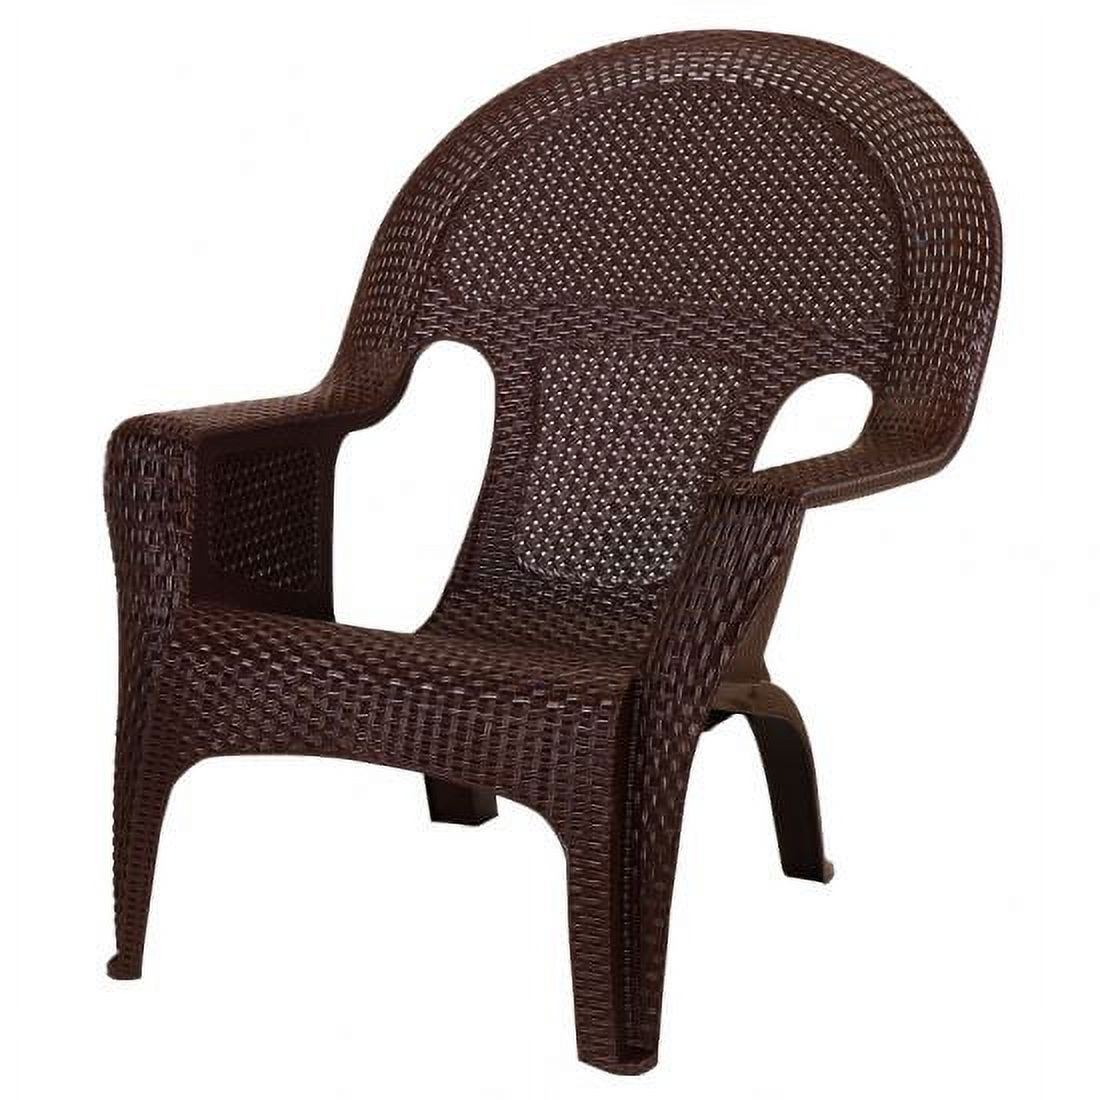 Adams Manufacturing 259505 Resin Woven Lounge Chair, Earth Brown - image 1 of 3